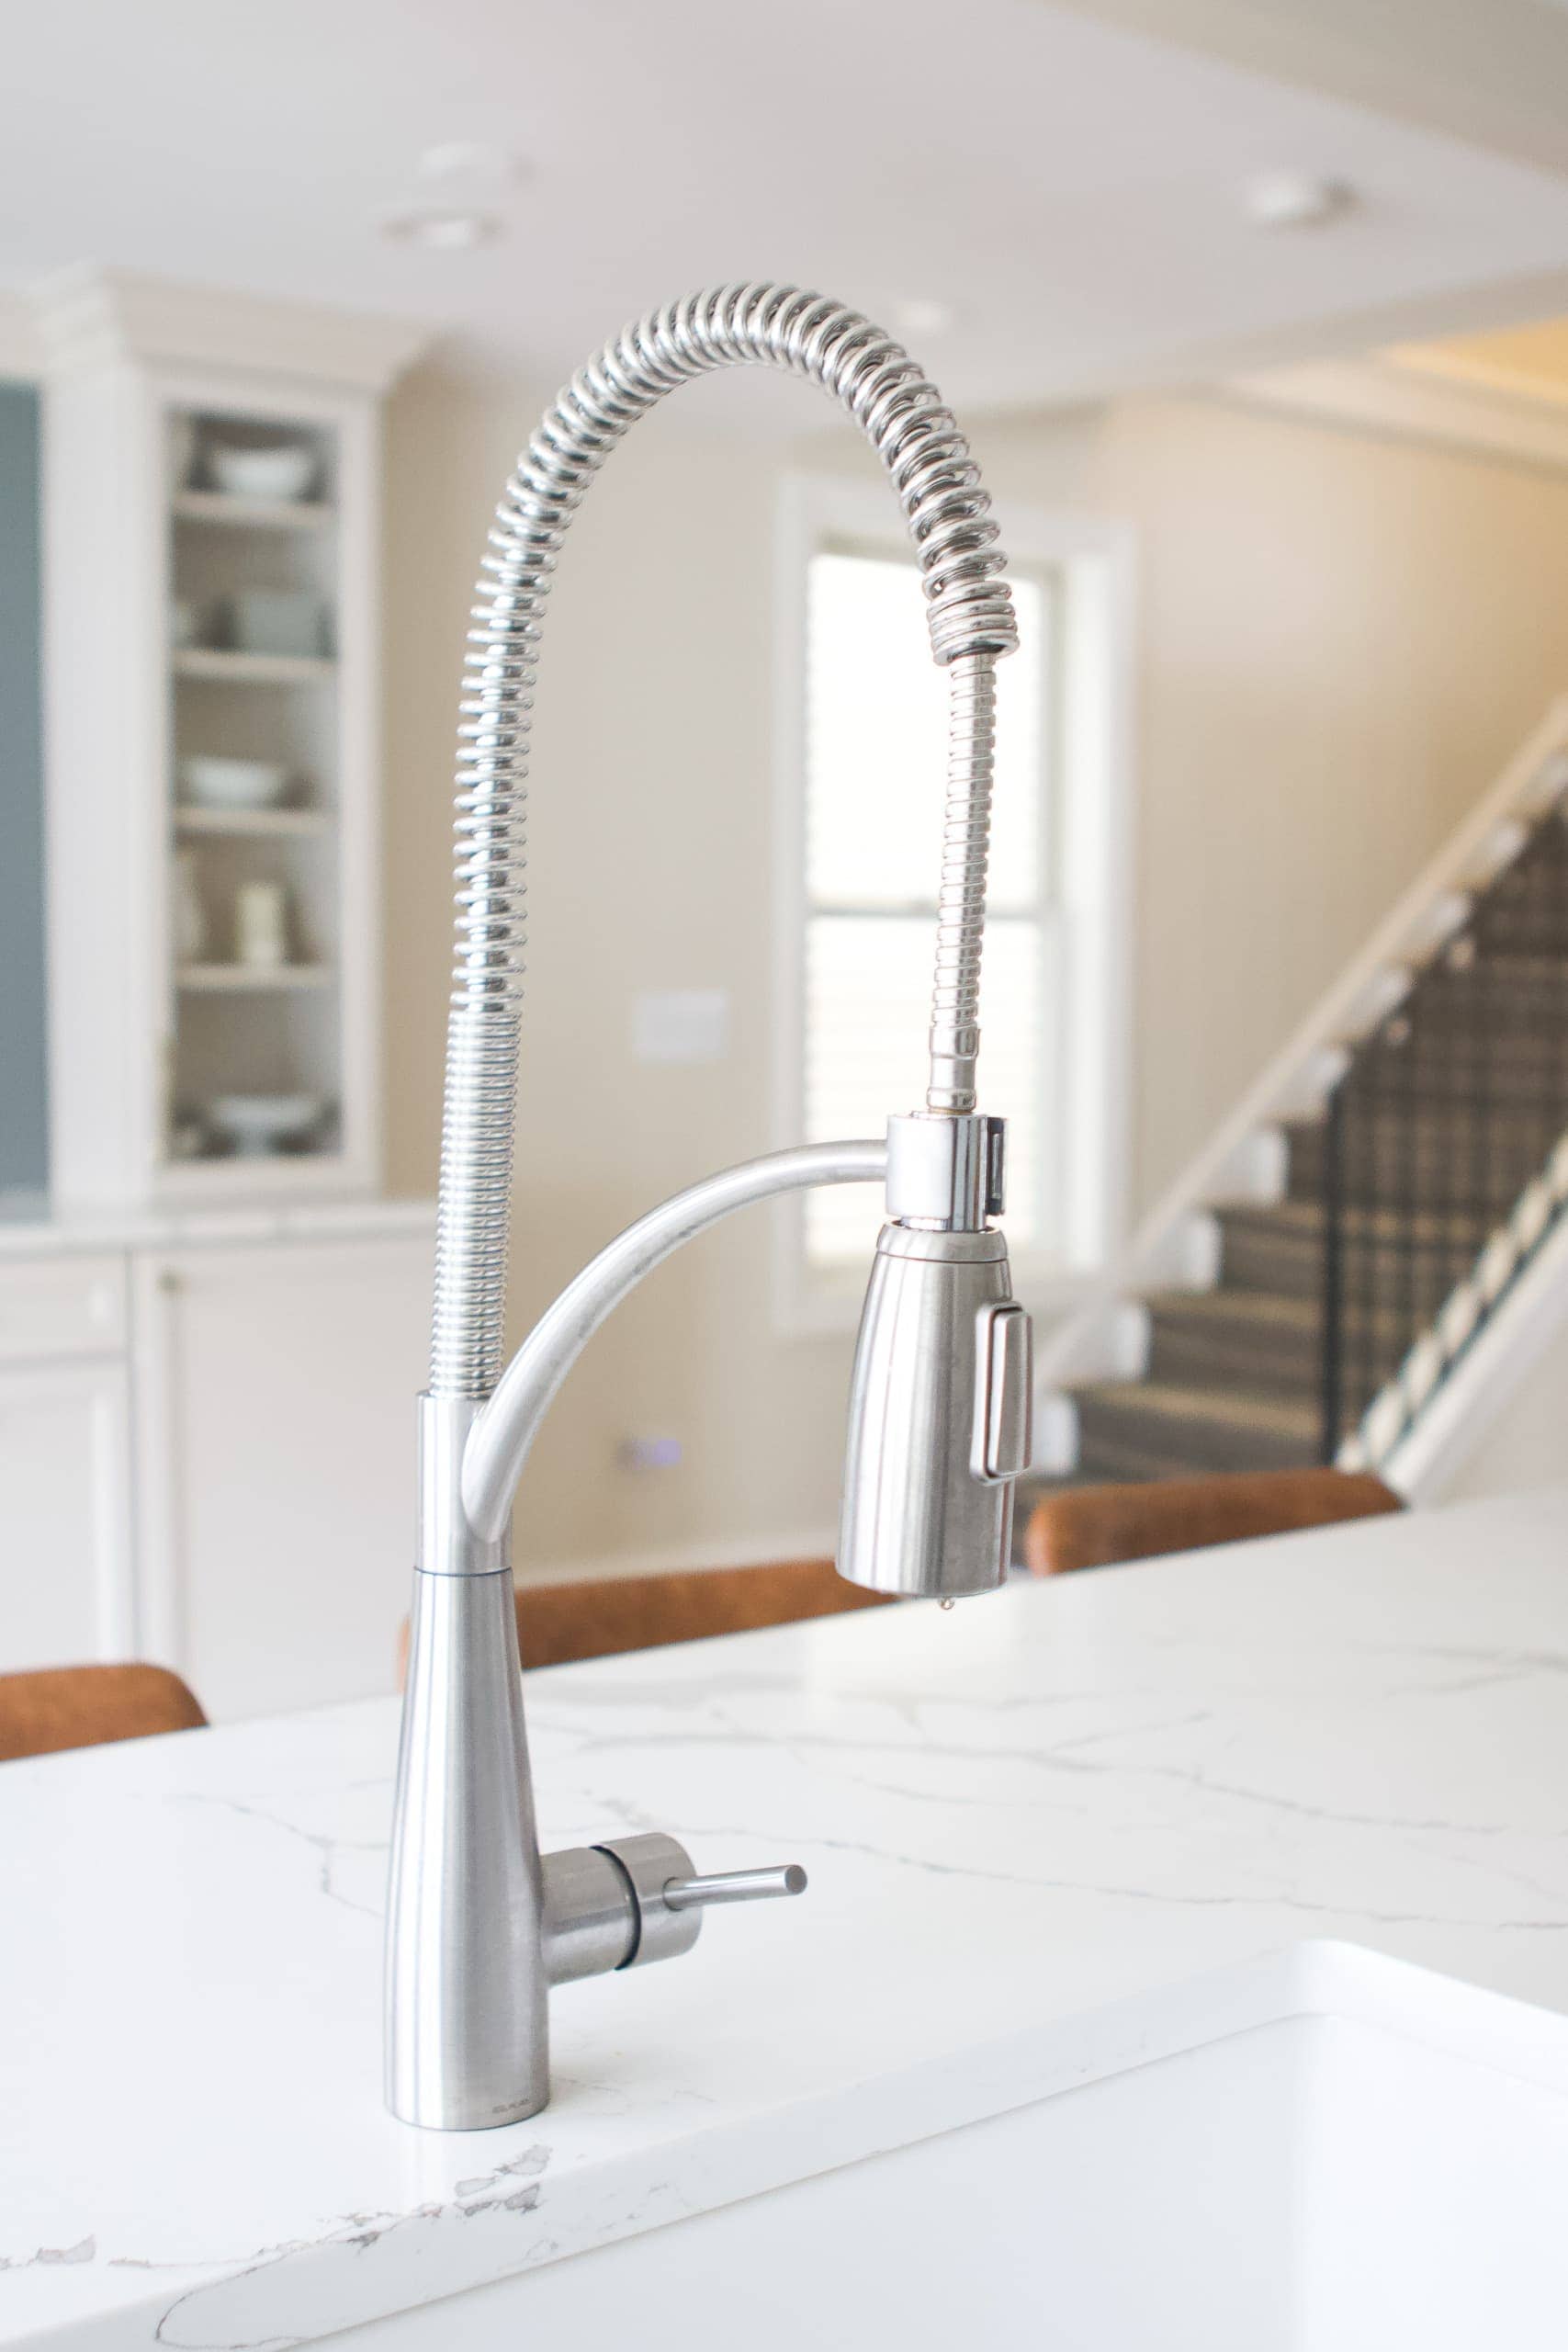 Our gorgeous faucet from Elkay